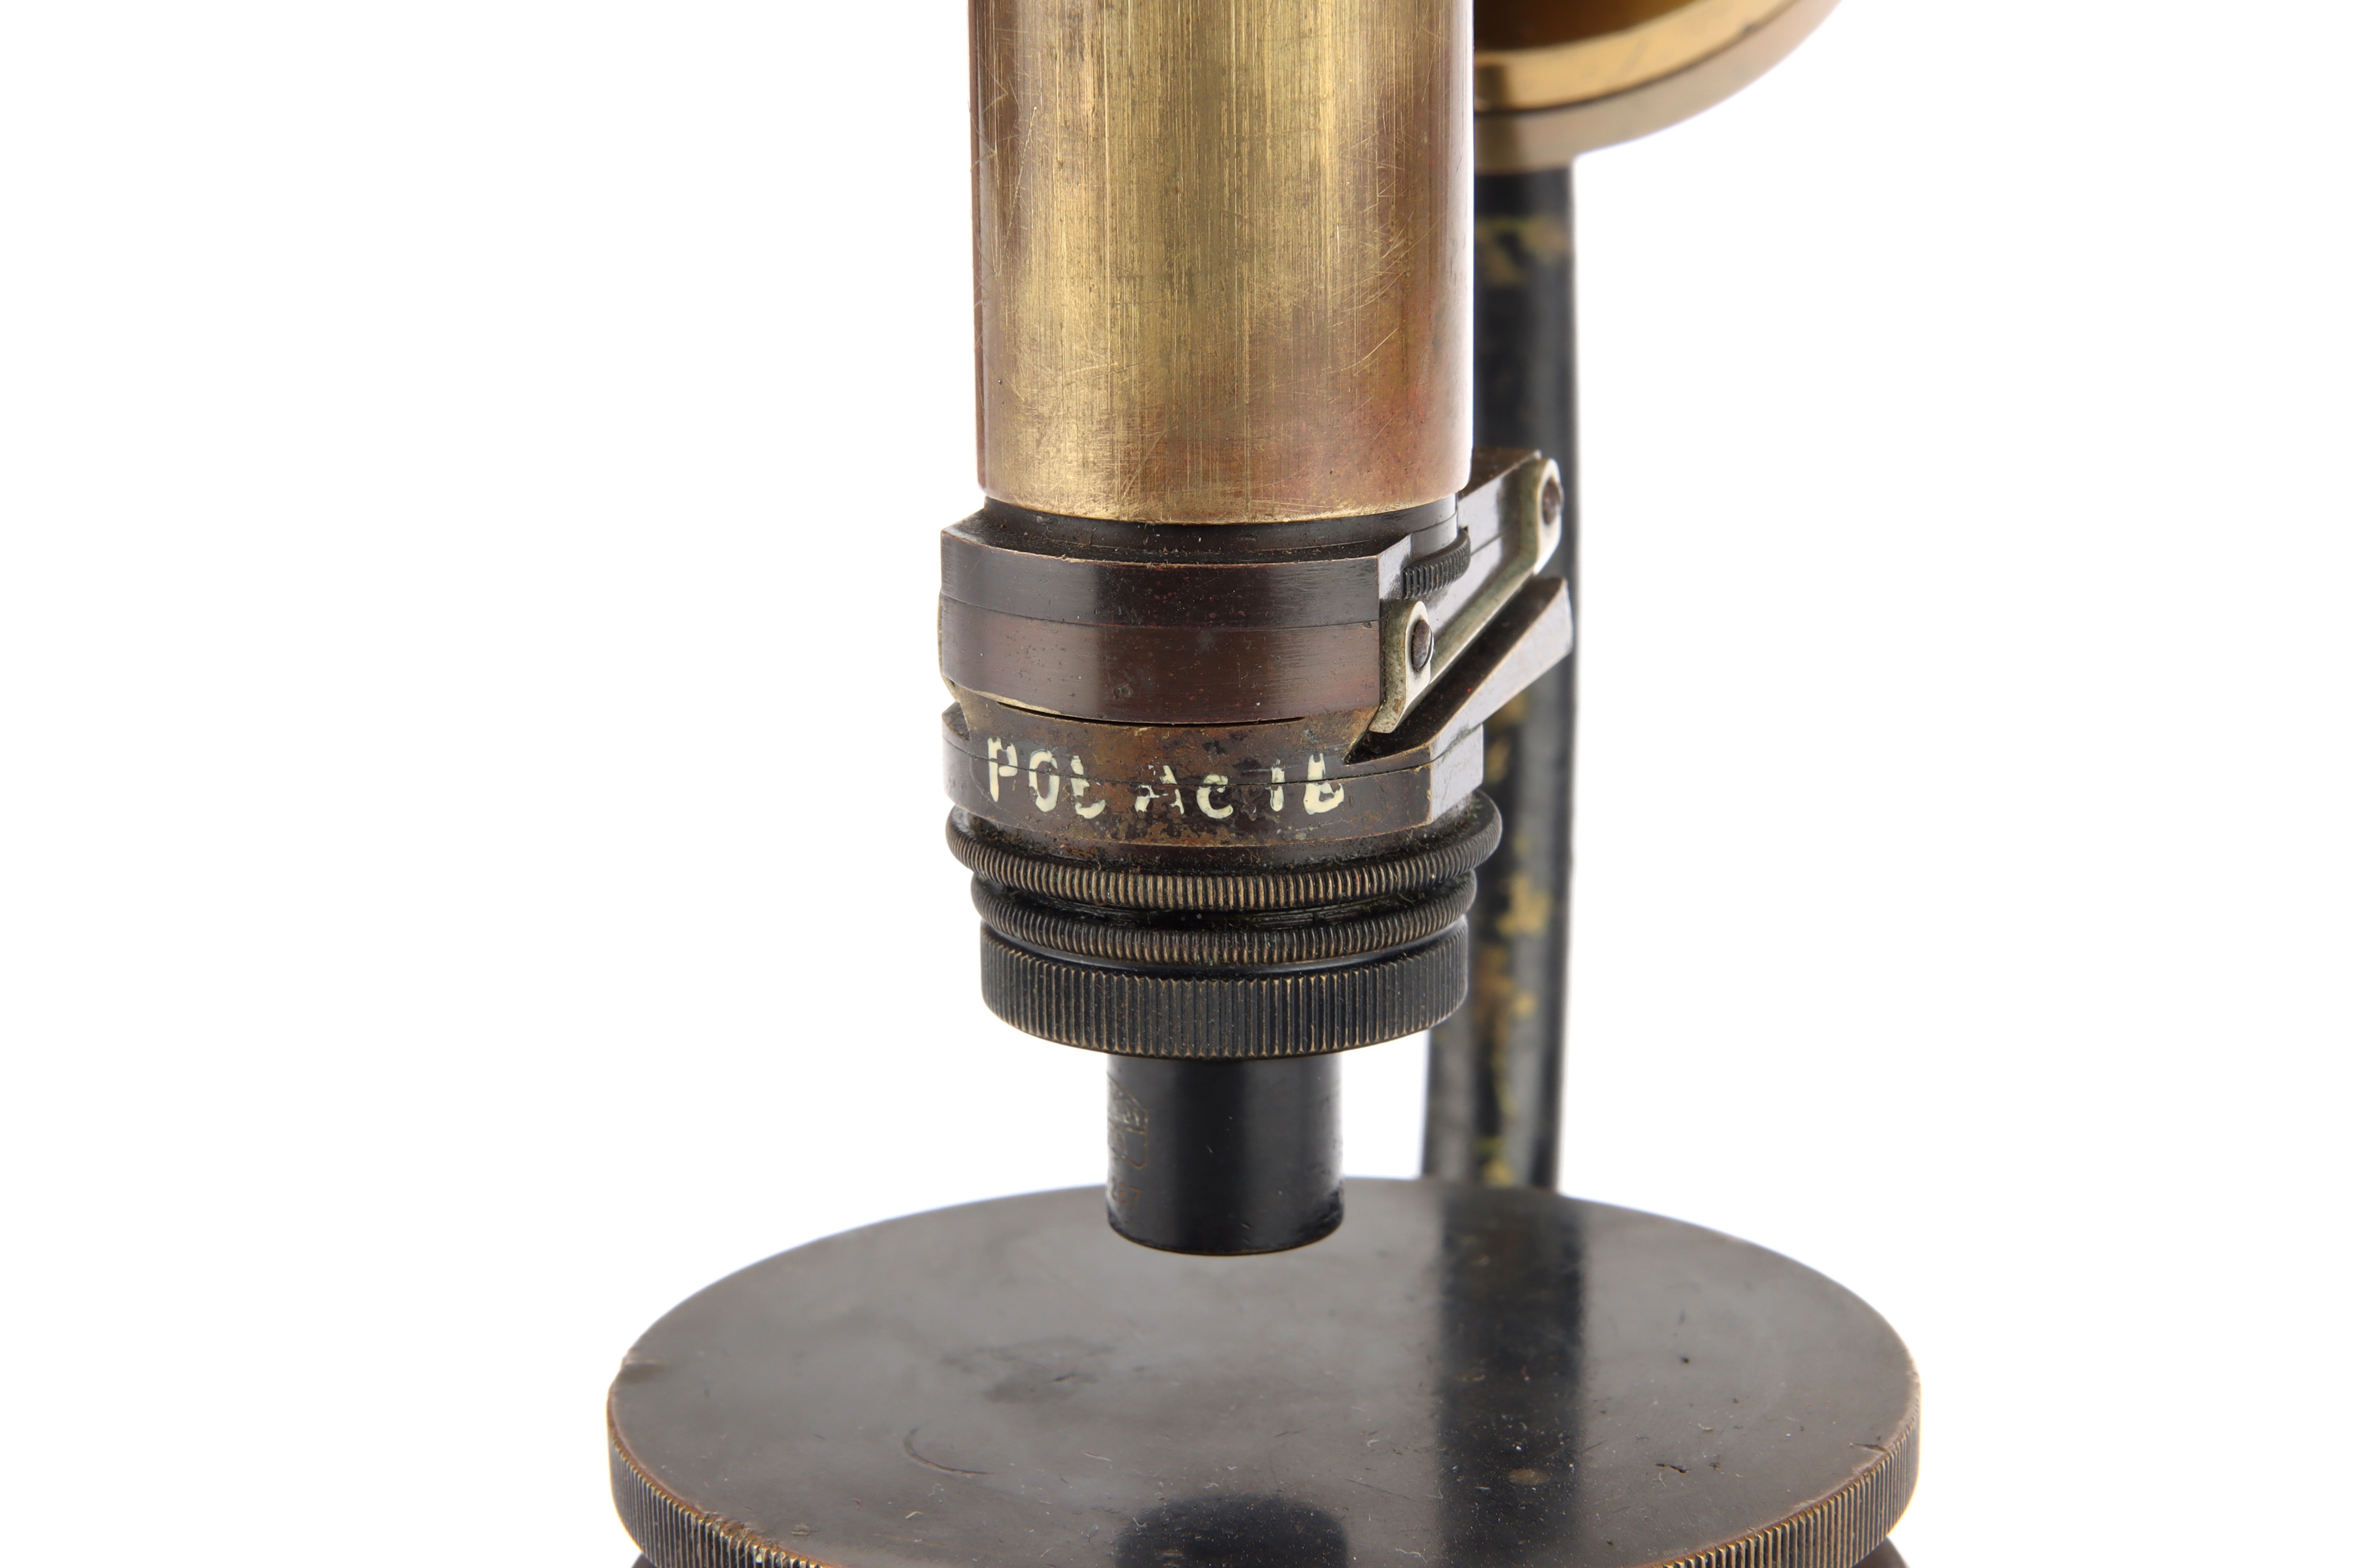 Martens Ball-Jointed Metallographic Preparation Microscope, - Image 5 of 8